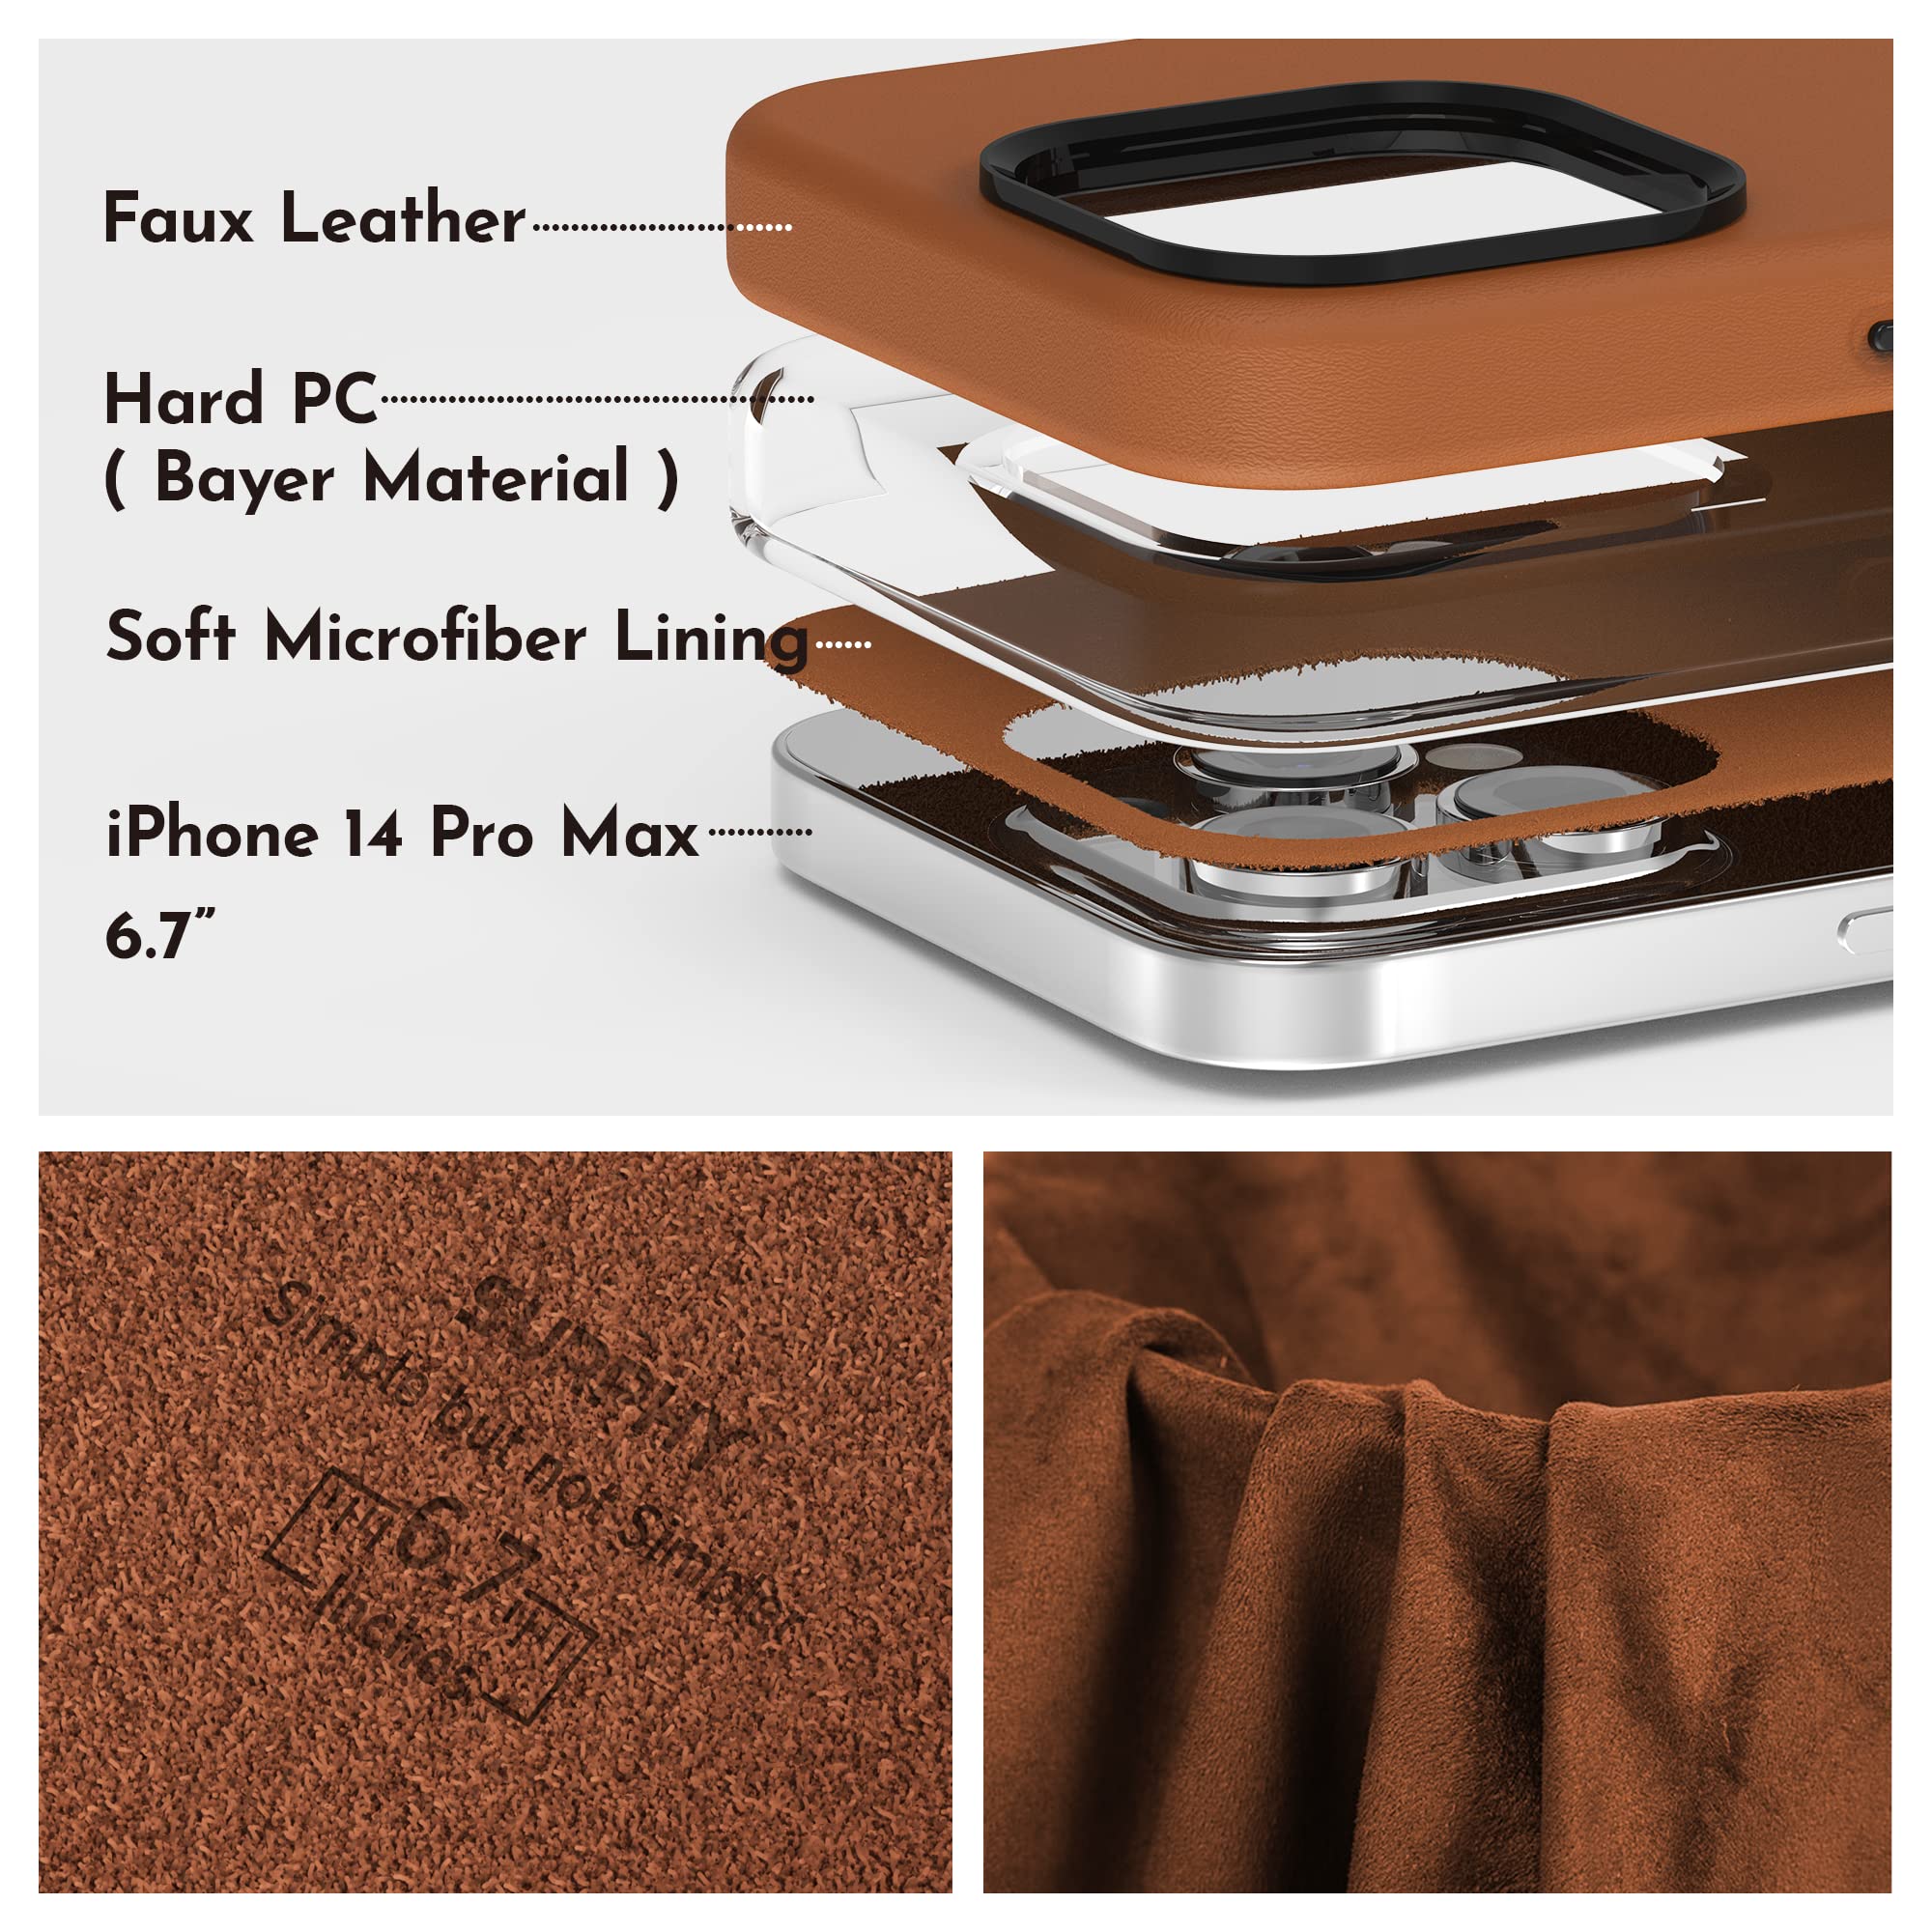 SURPHY Designed for Faux Leather iPhone 14 Pro Max Case with Screen Protector (6.7 inch), Metallic Buttons & Microfiber Lining Leather Phone Case for 14 Pro Max, Brown